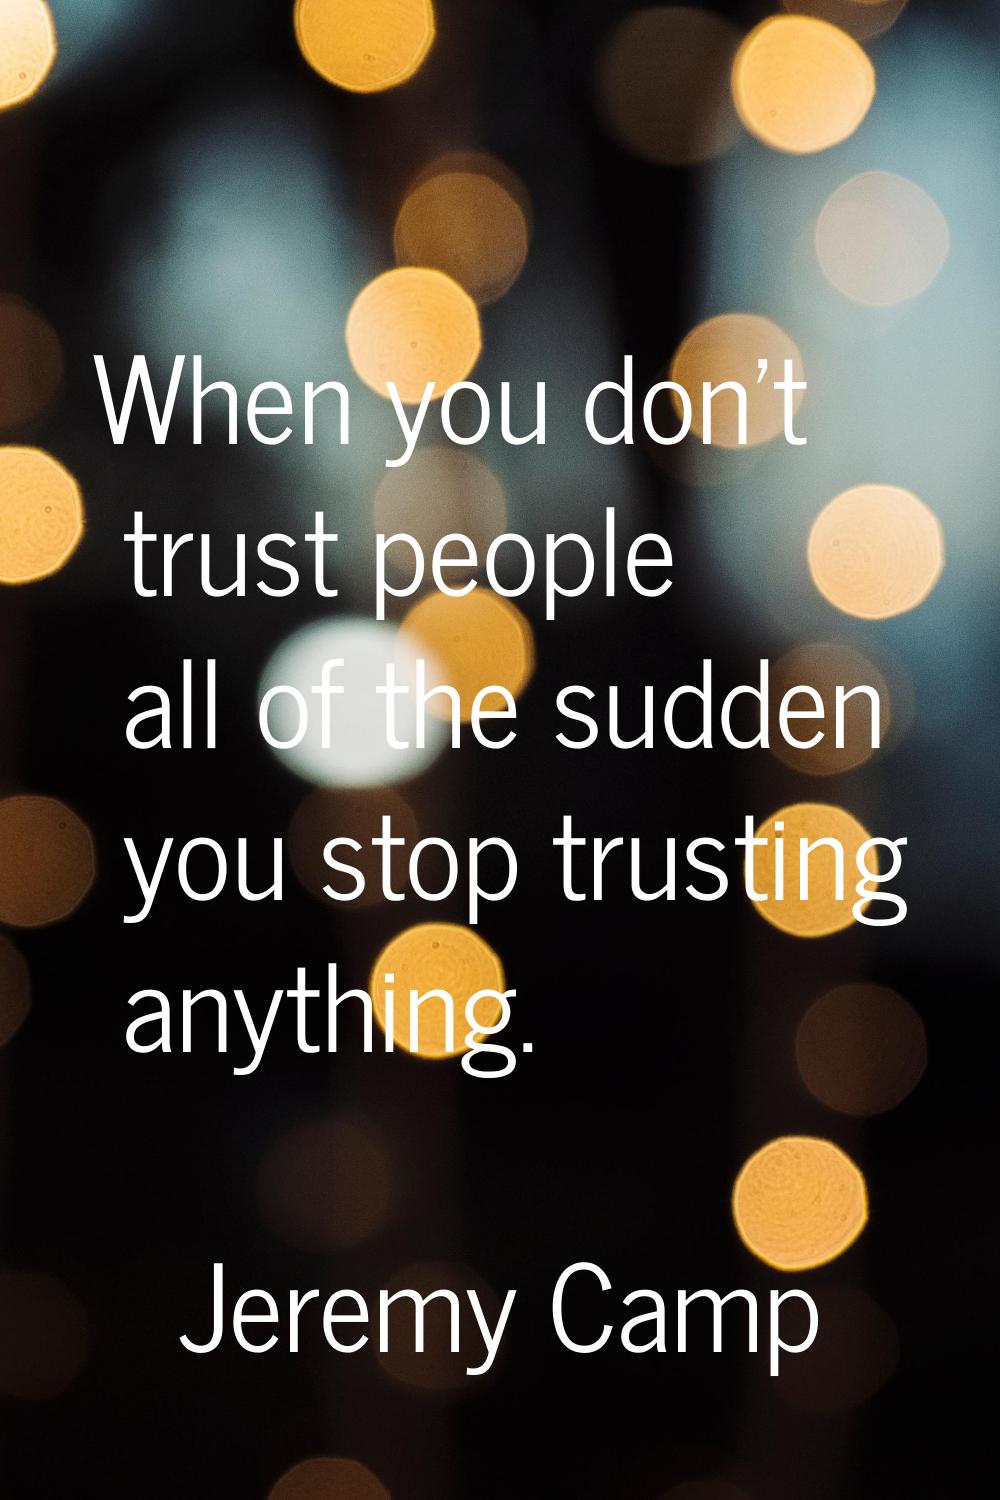 When you don't trust people all of the sudden you stop trusting anything.